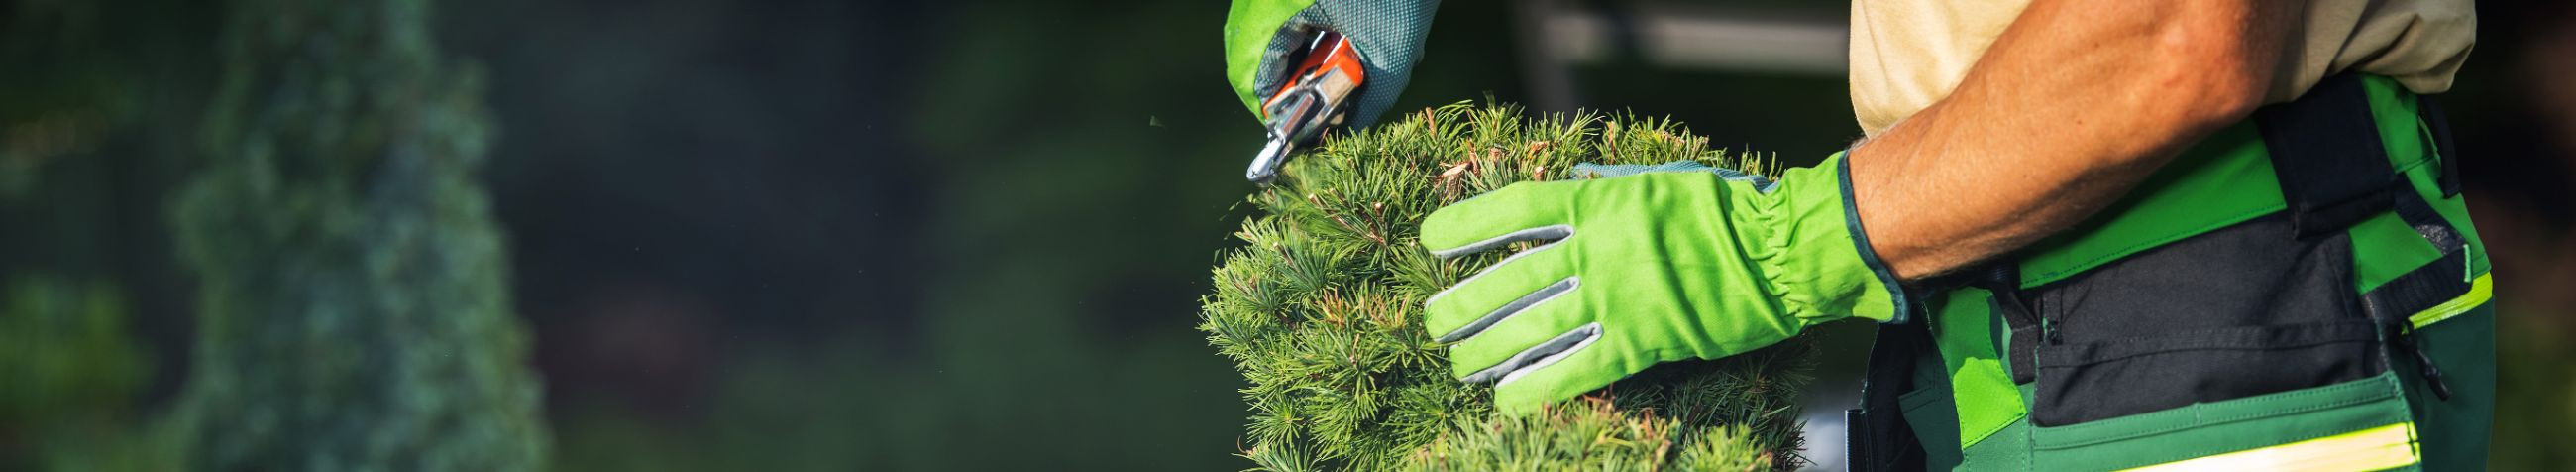 We offer comprehensive arboricultural services including the cutting of dangerous trees, milling, harvesting, cutting hedges, trees care cuts, cutting fruit trees, and cleaning of grunts, ensuring the health and safety of both the greenery and the community.